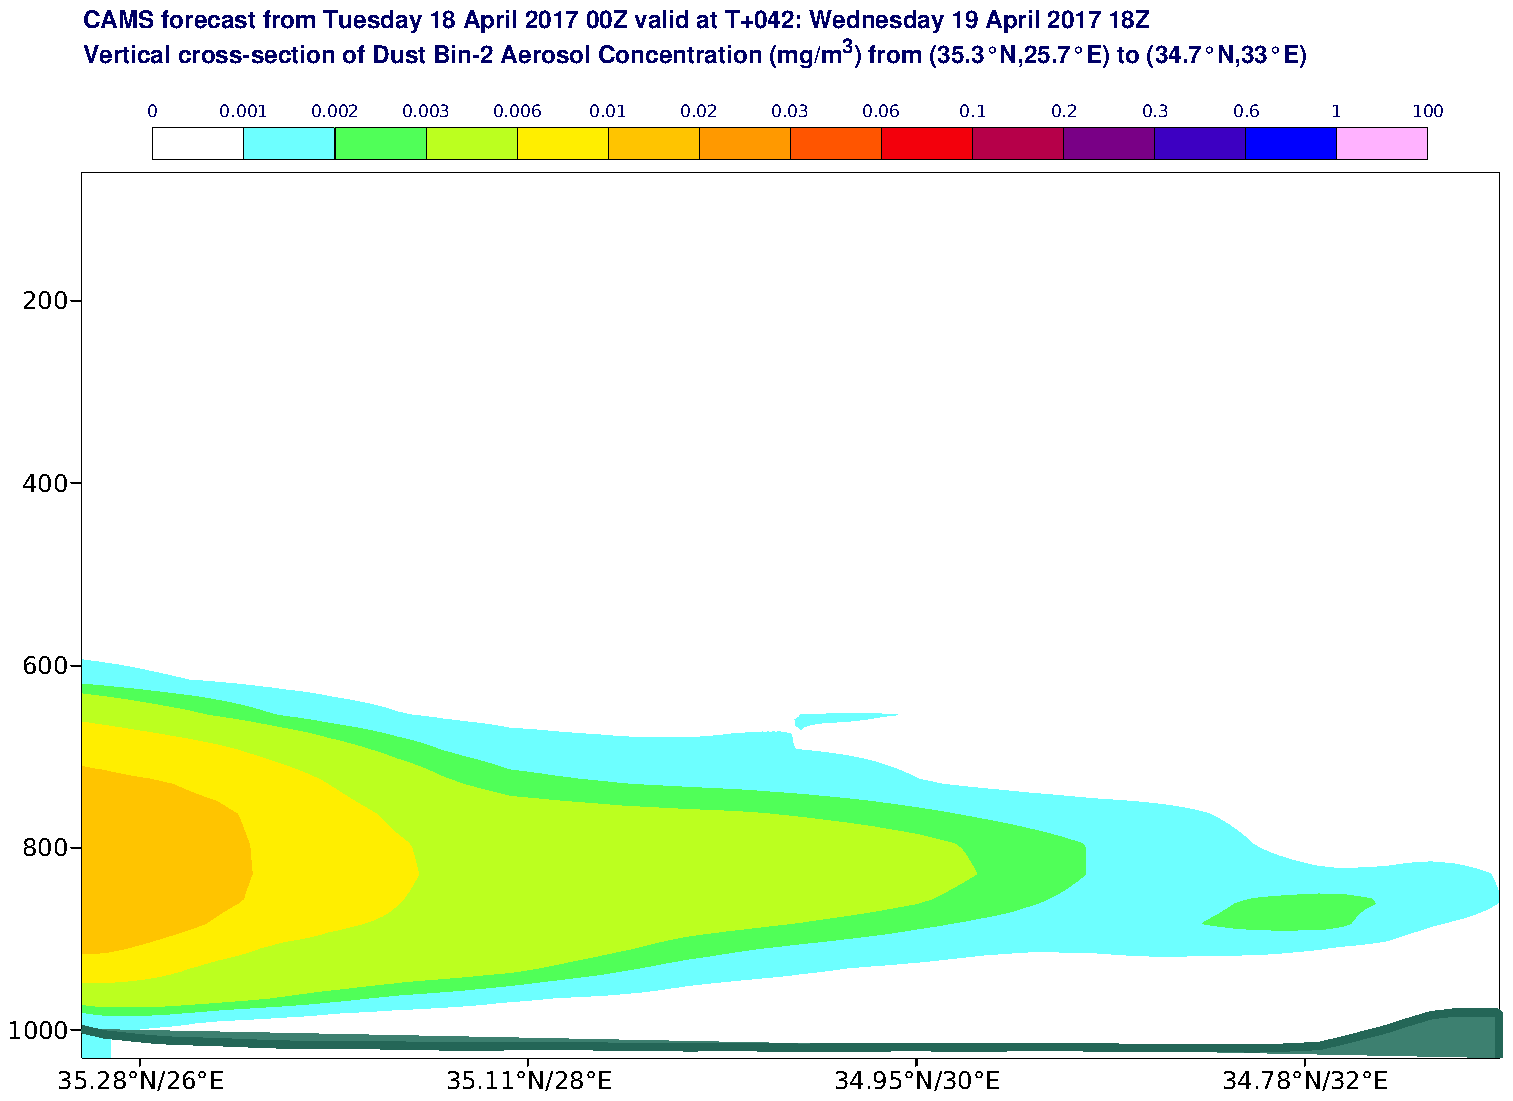 Vertical cross-section of Dust Bin-2 Aerosol Concentration (mg/m3) valid at T42 - 2017-04-19 18:00